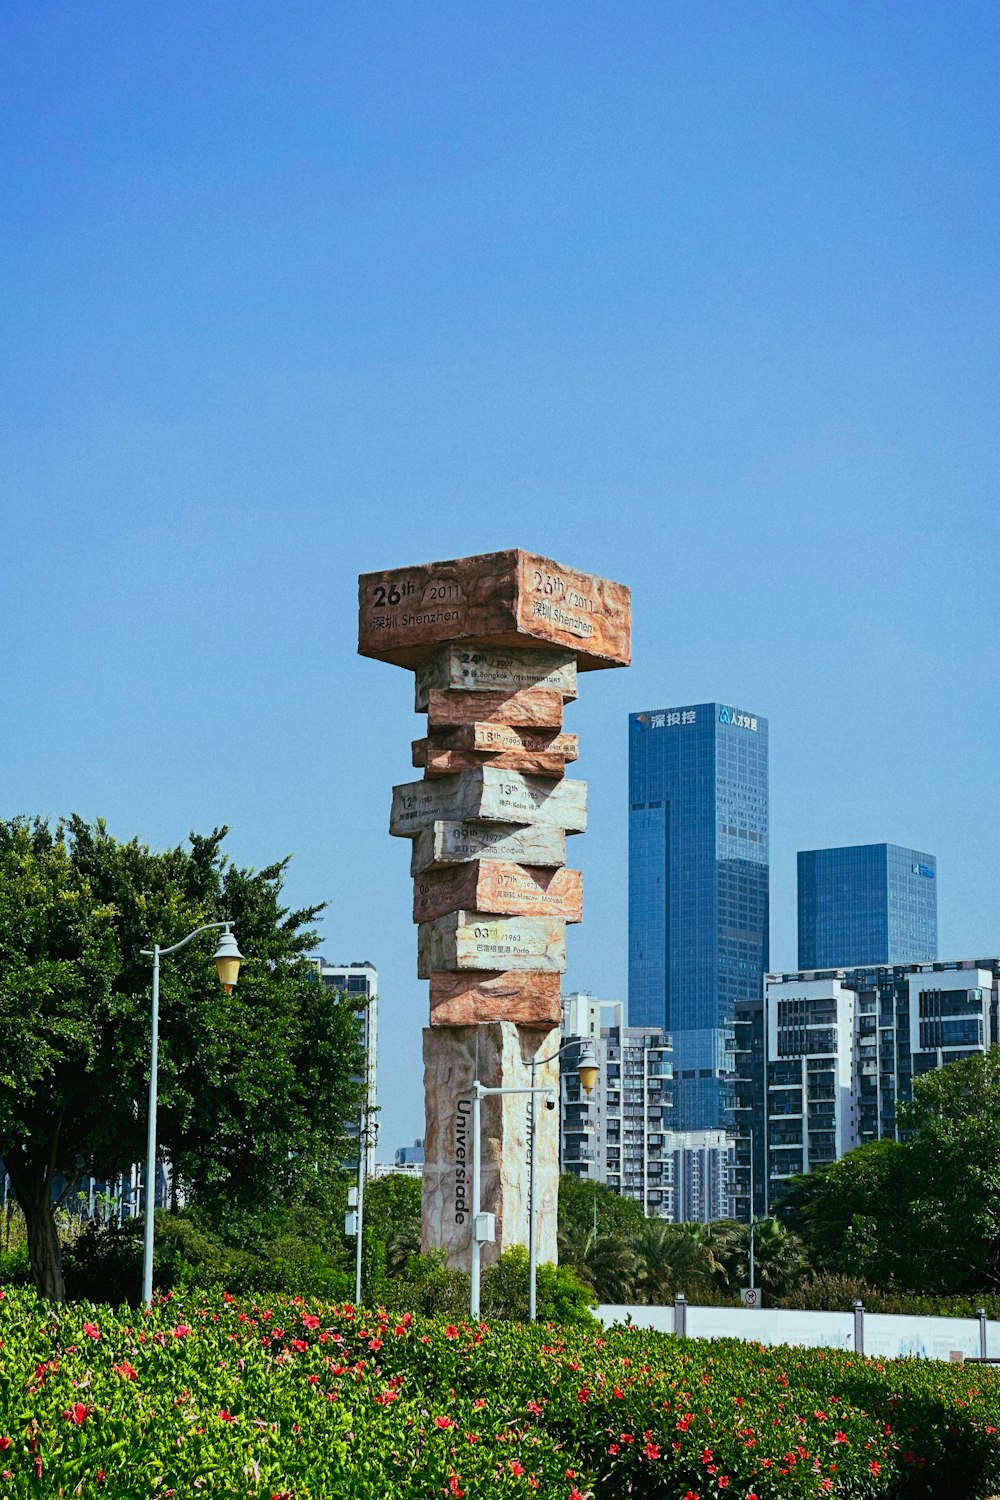 a stone sculpture in a park with a city in the background